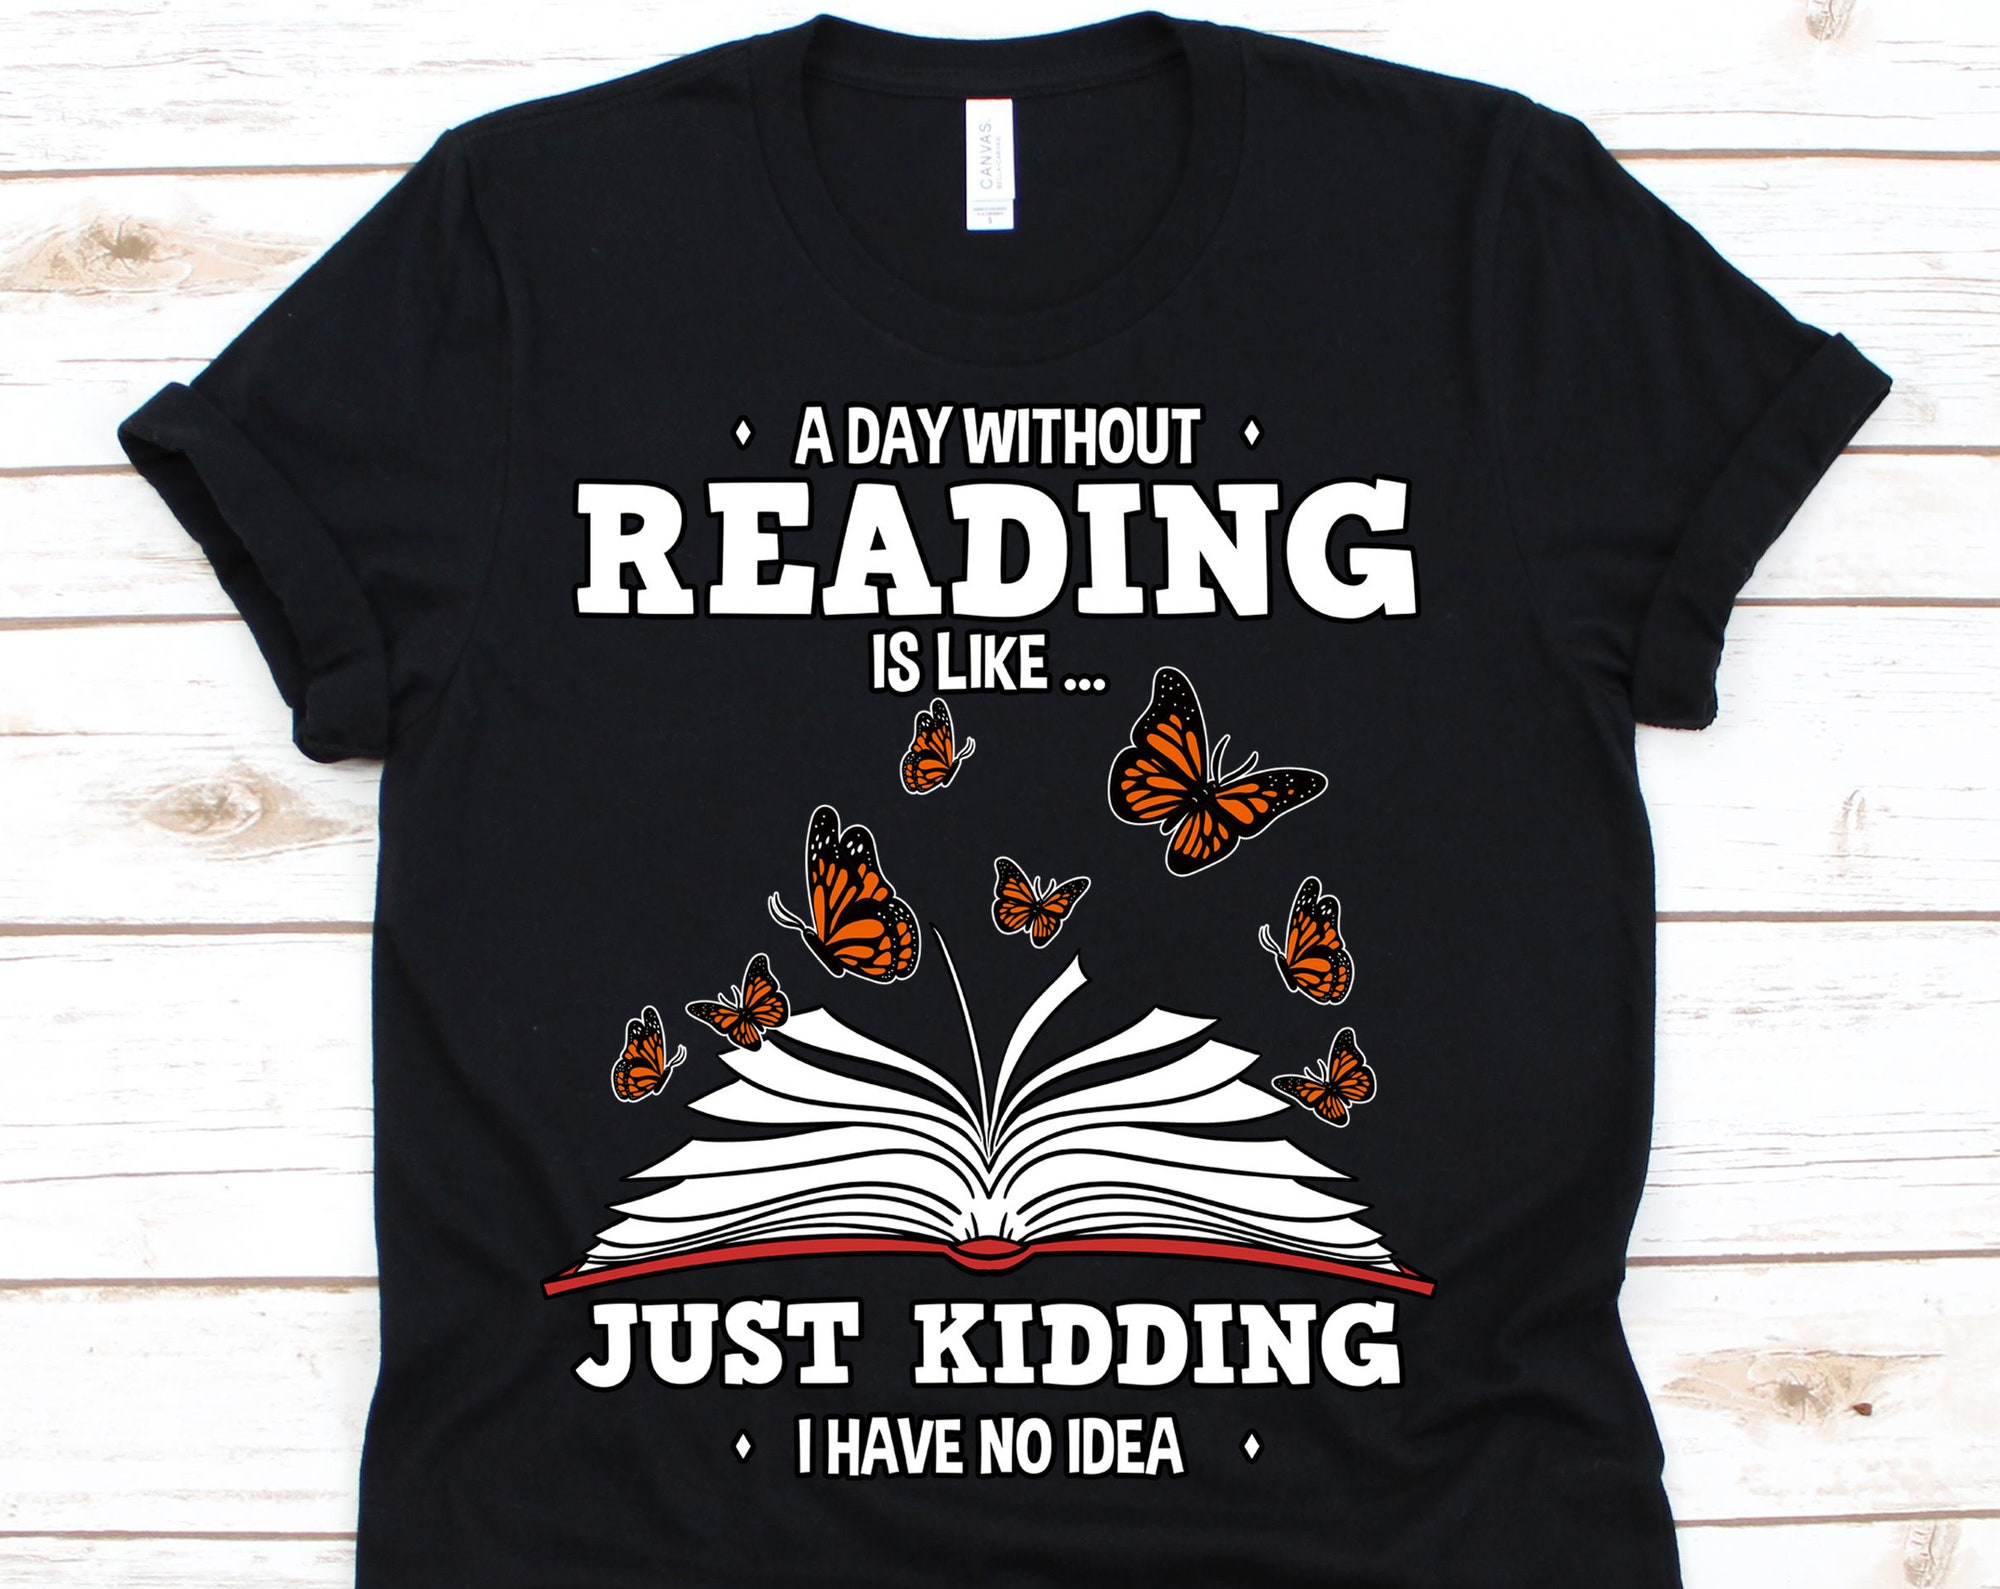 Discover A Day Without Reading Shirt, Butterfly, Bookworm, Book Lovers Gift